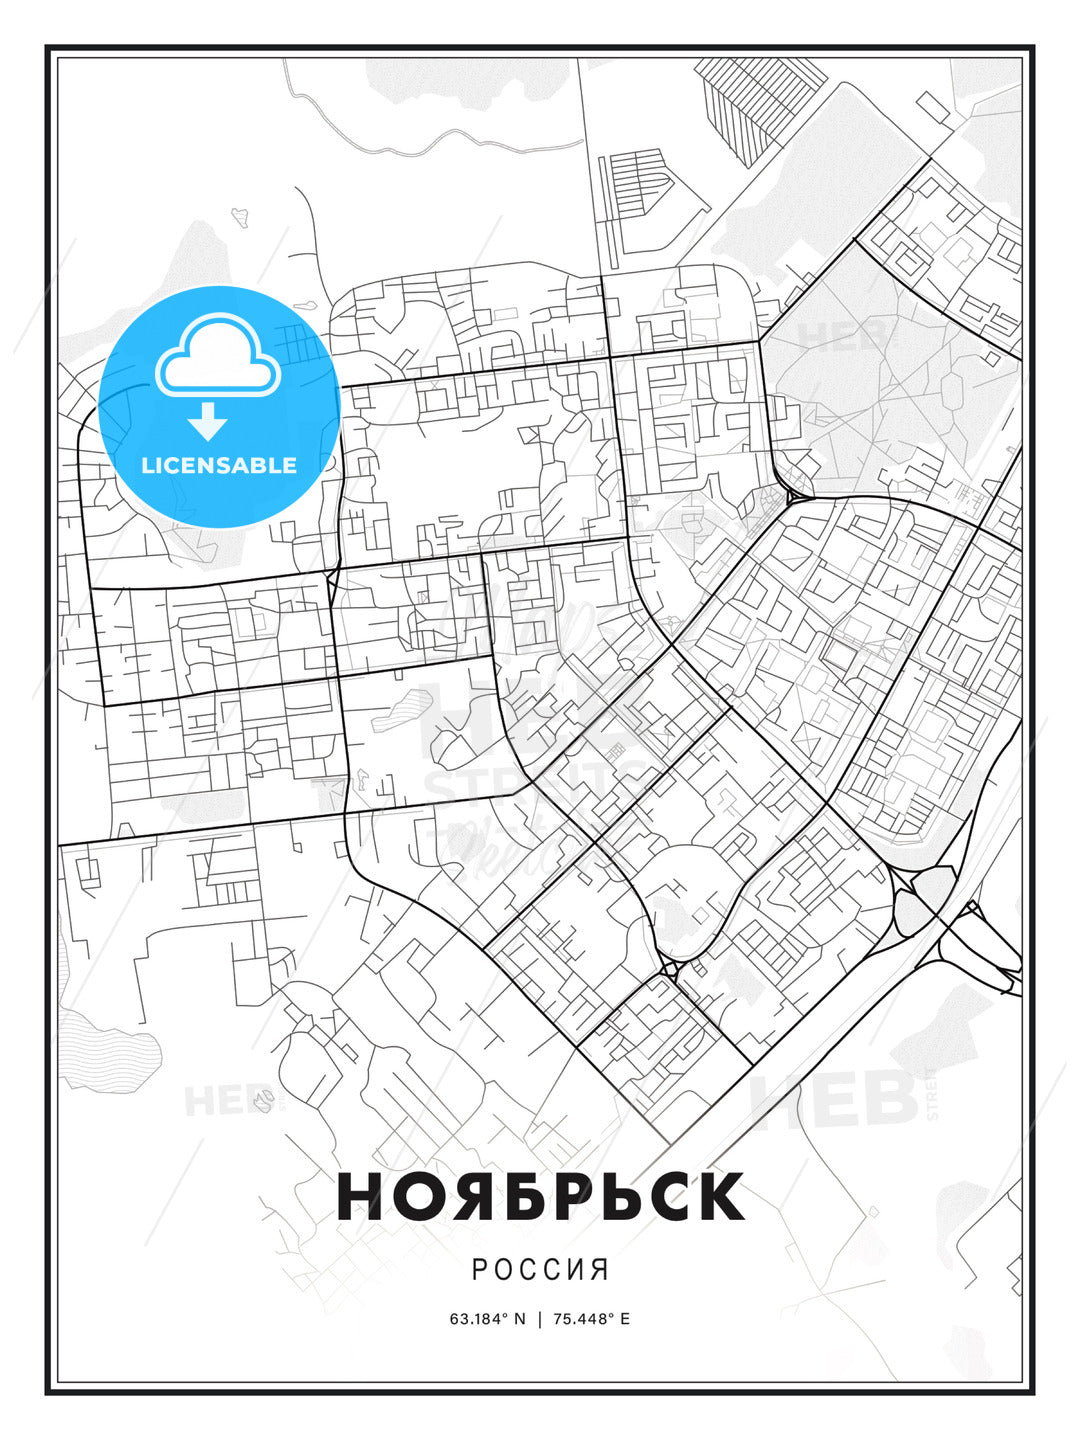 НОЯБРЬСК / Noyabrsk, Russia, Modern Print Template in Various Formats - HEBSTREITS Sketches